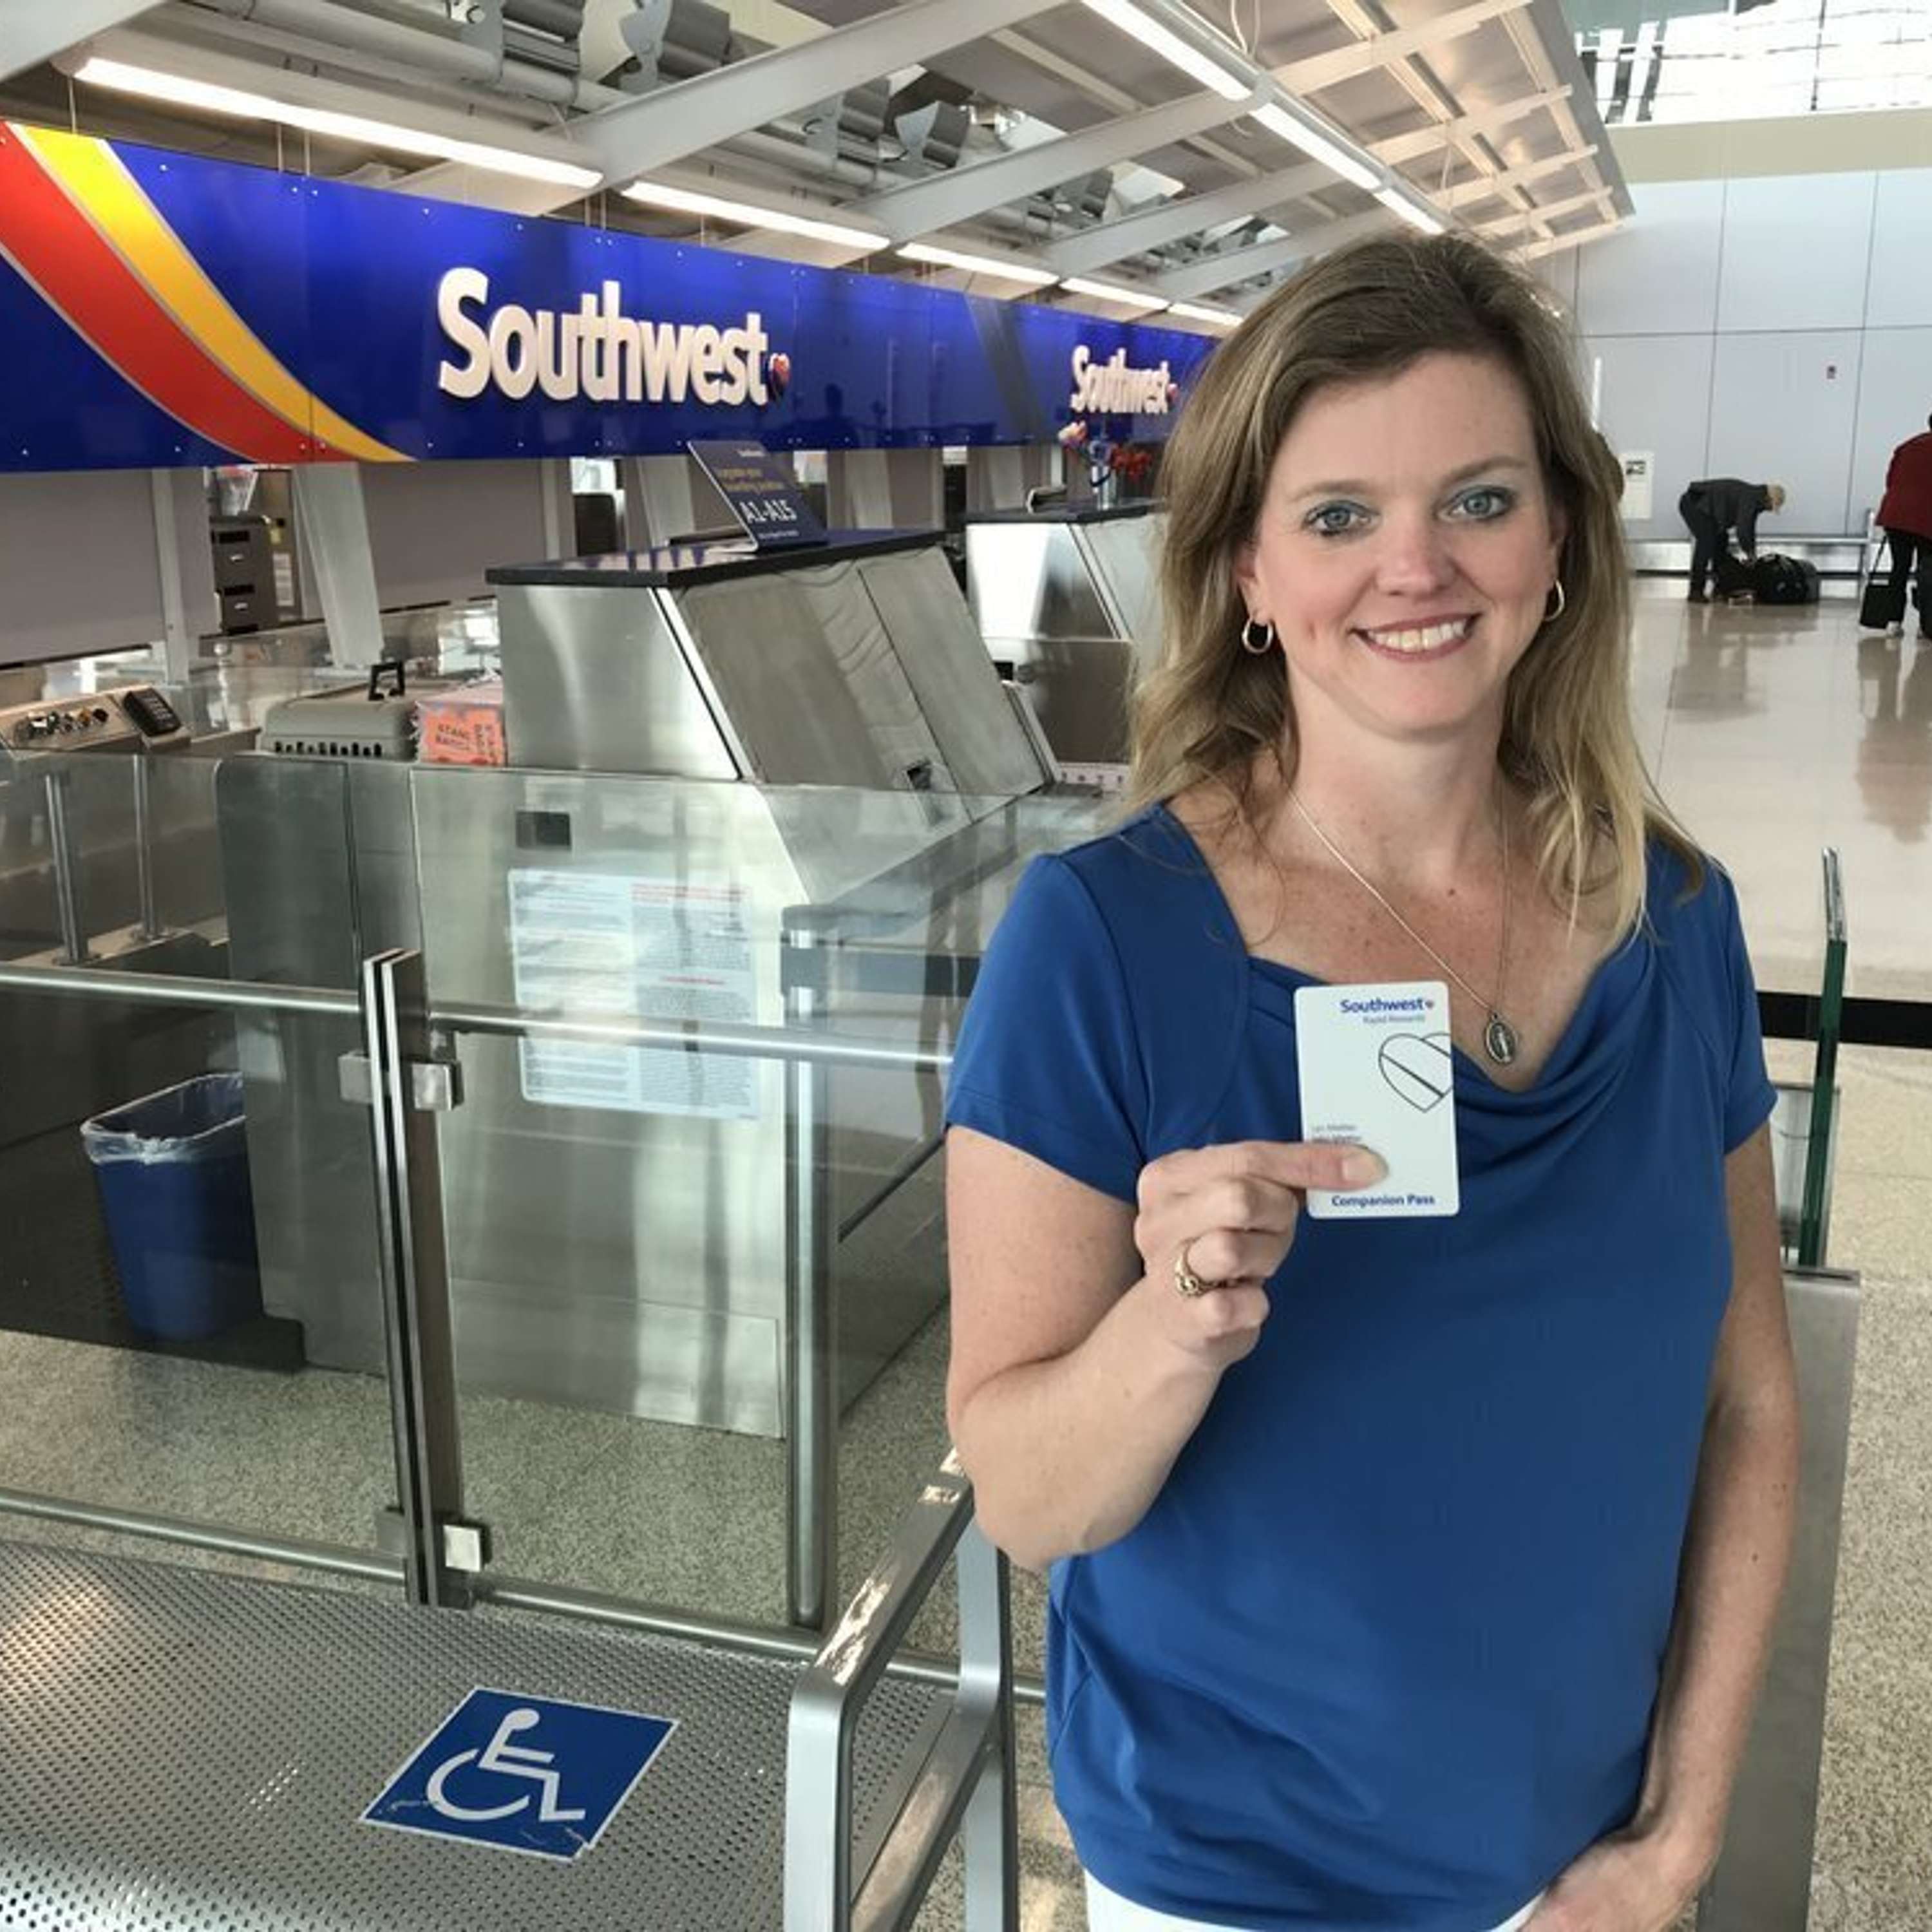 92 | Not All Companion Passes Are Created Equal: Comparing Delta's and Alaska's to Southwest's